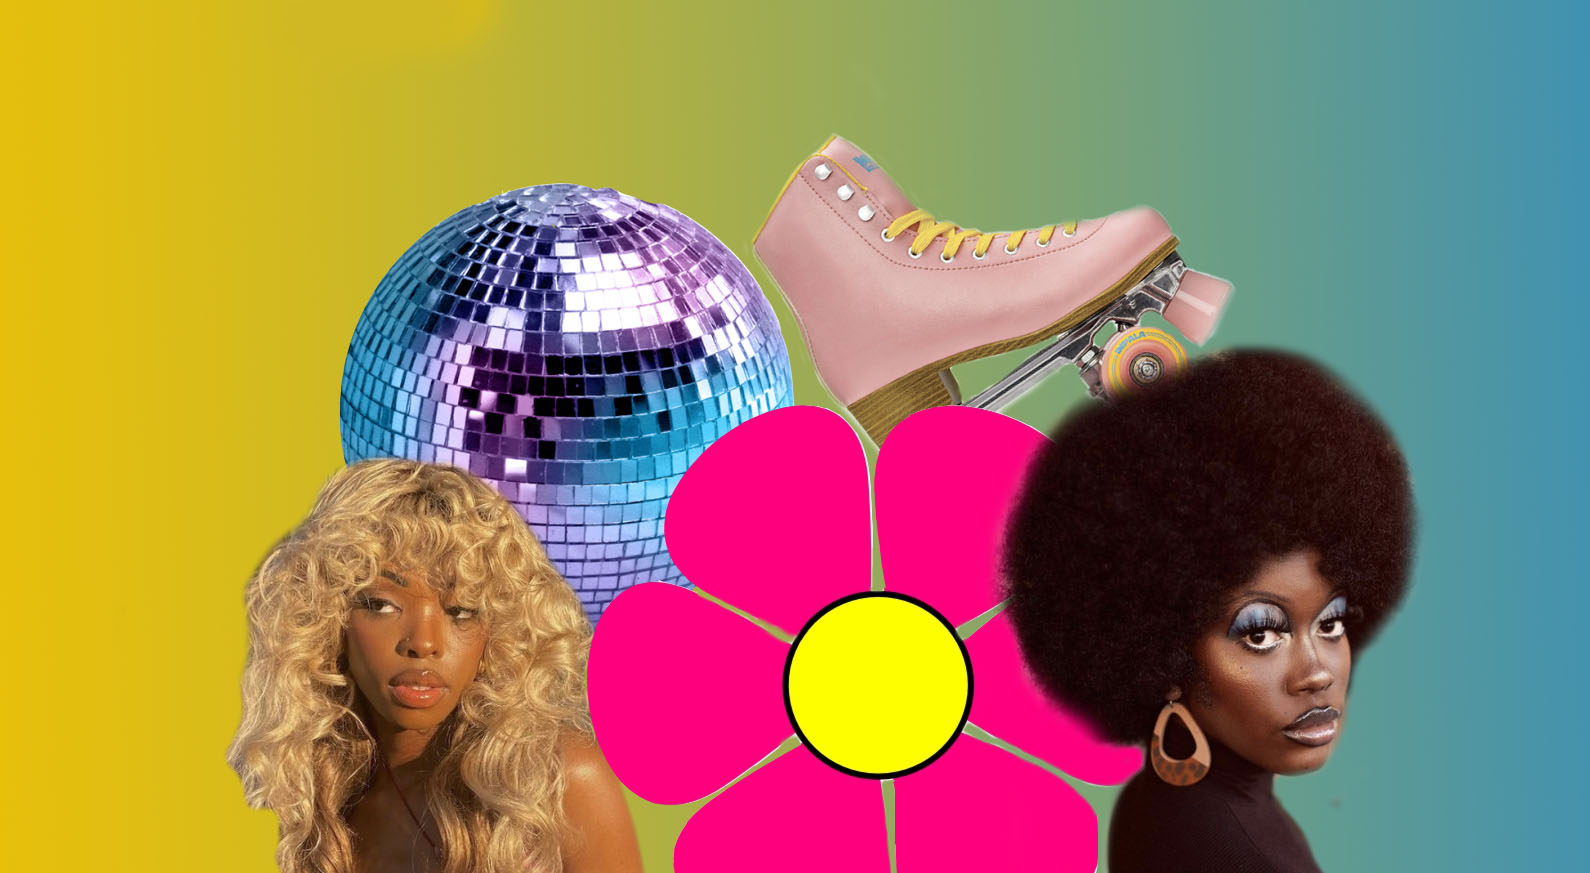 70s-Inspired Hair And Fashion Trends To Try